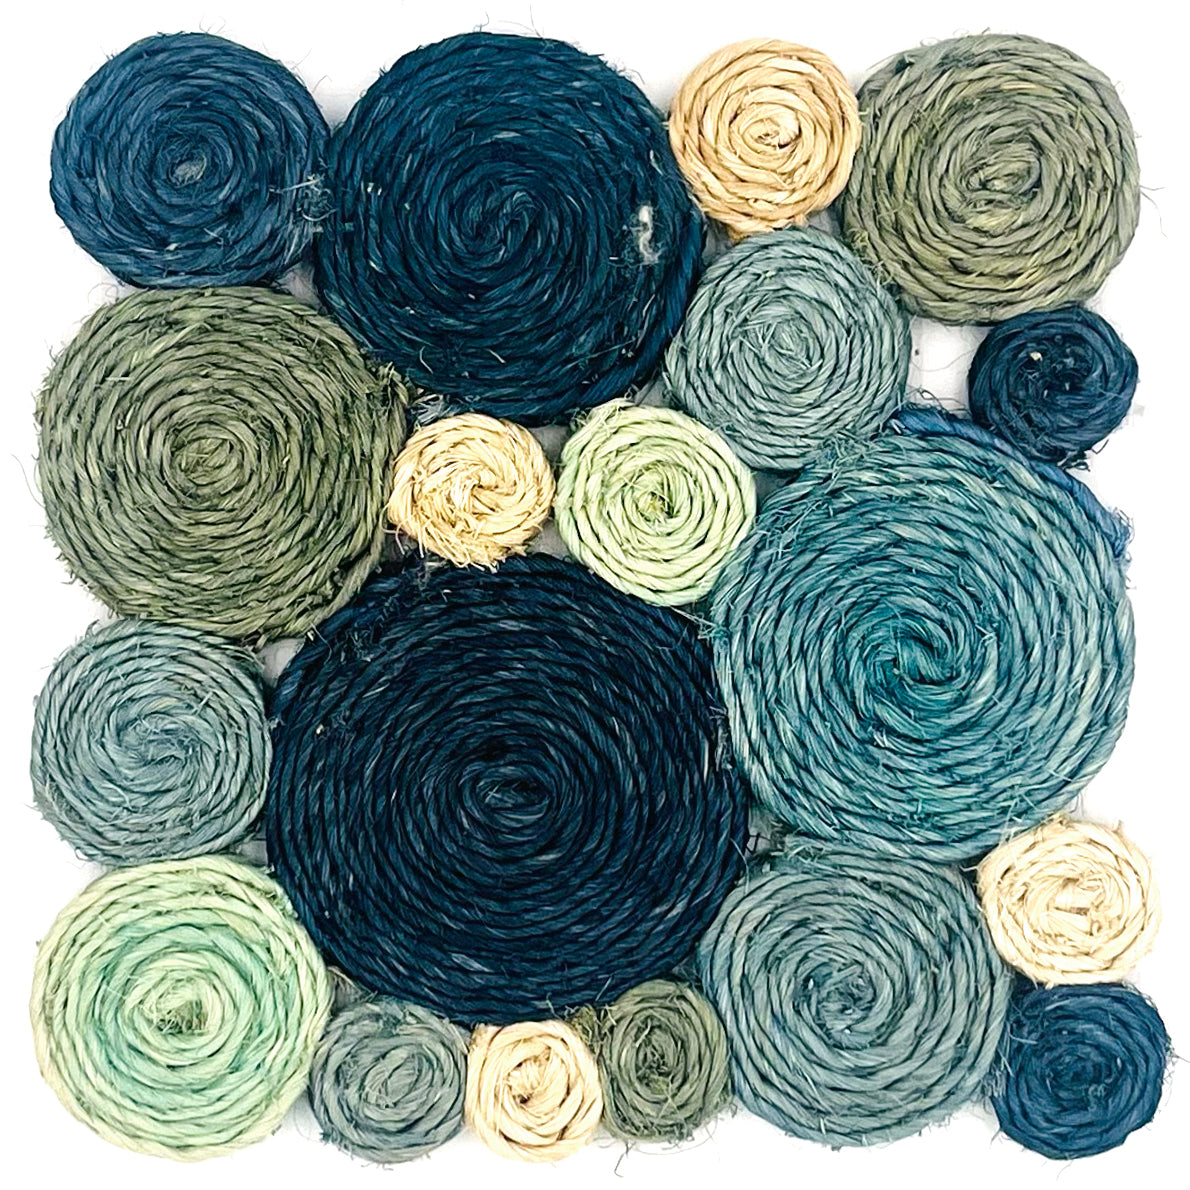 A woven rug swatch in natural fibers made up of circles in an organic pattern in shades of blue, acqua, turqoise and white.